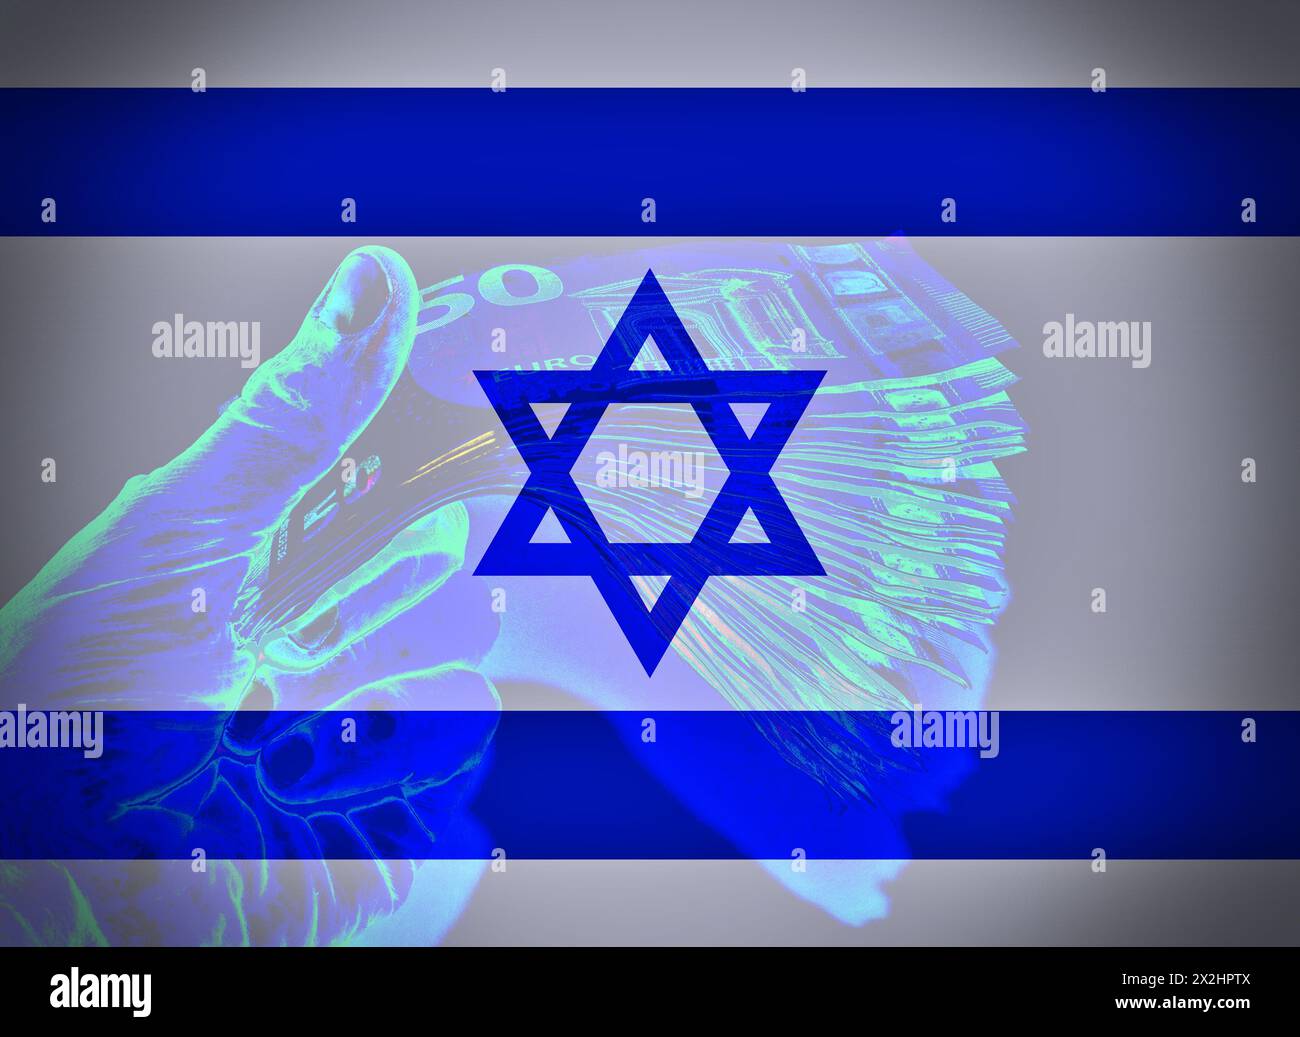 National flag of israel with hand holding money as background. finance concept Stock Photo